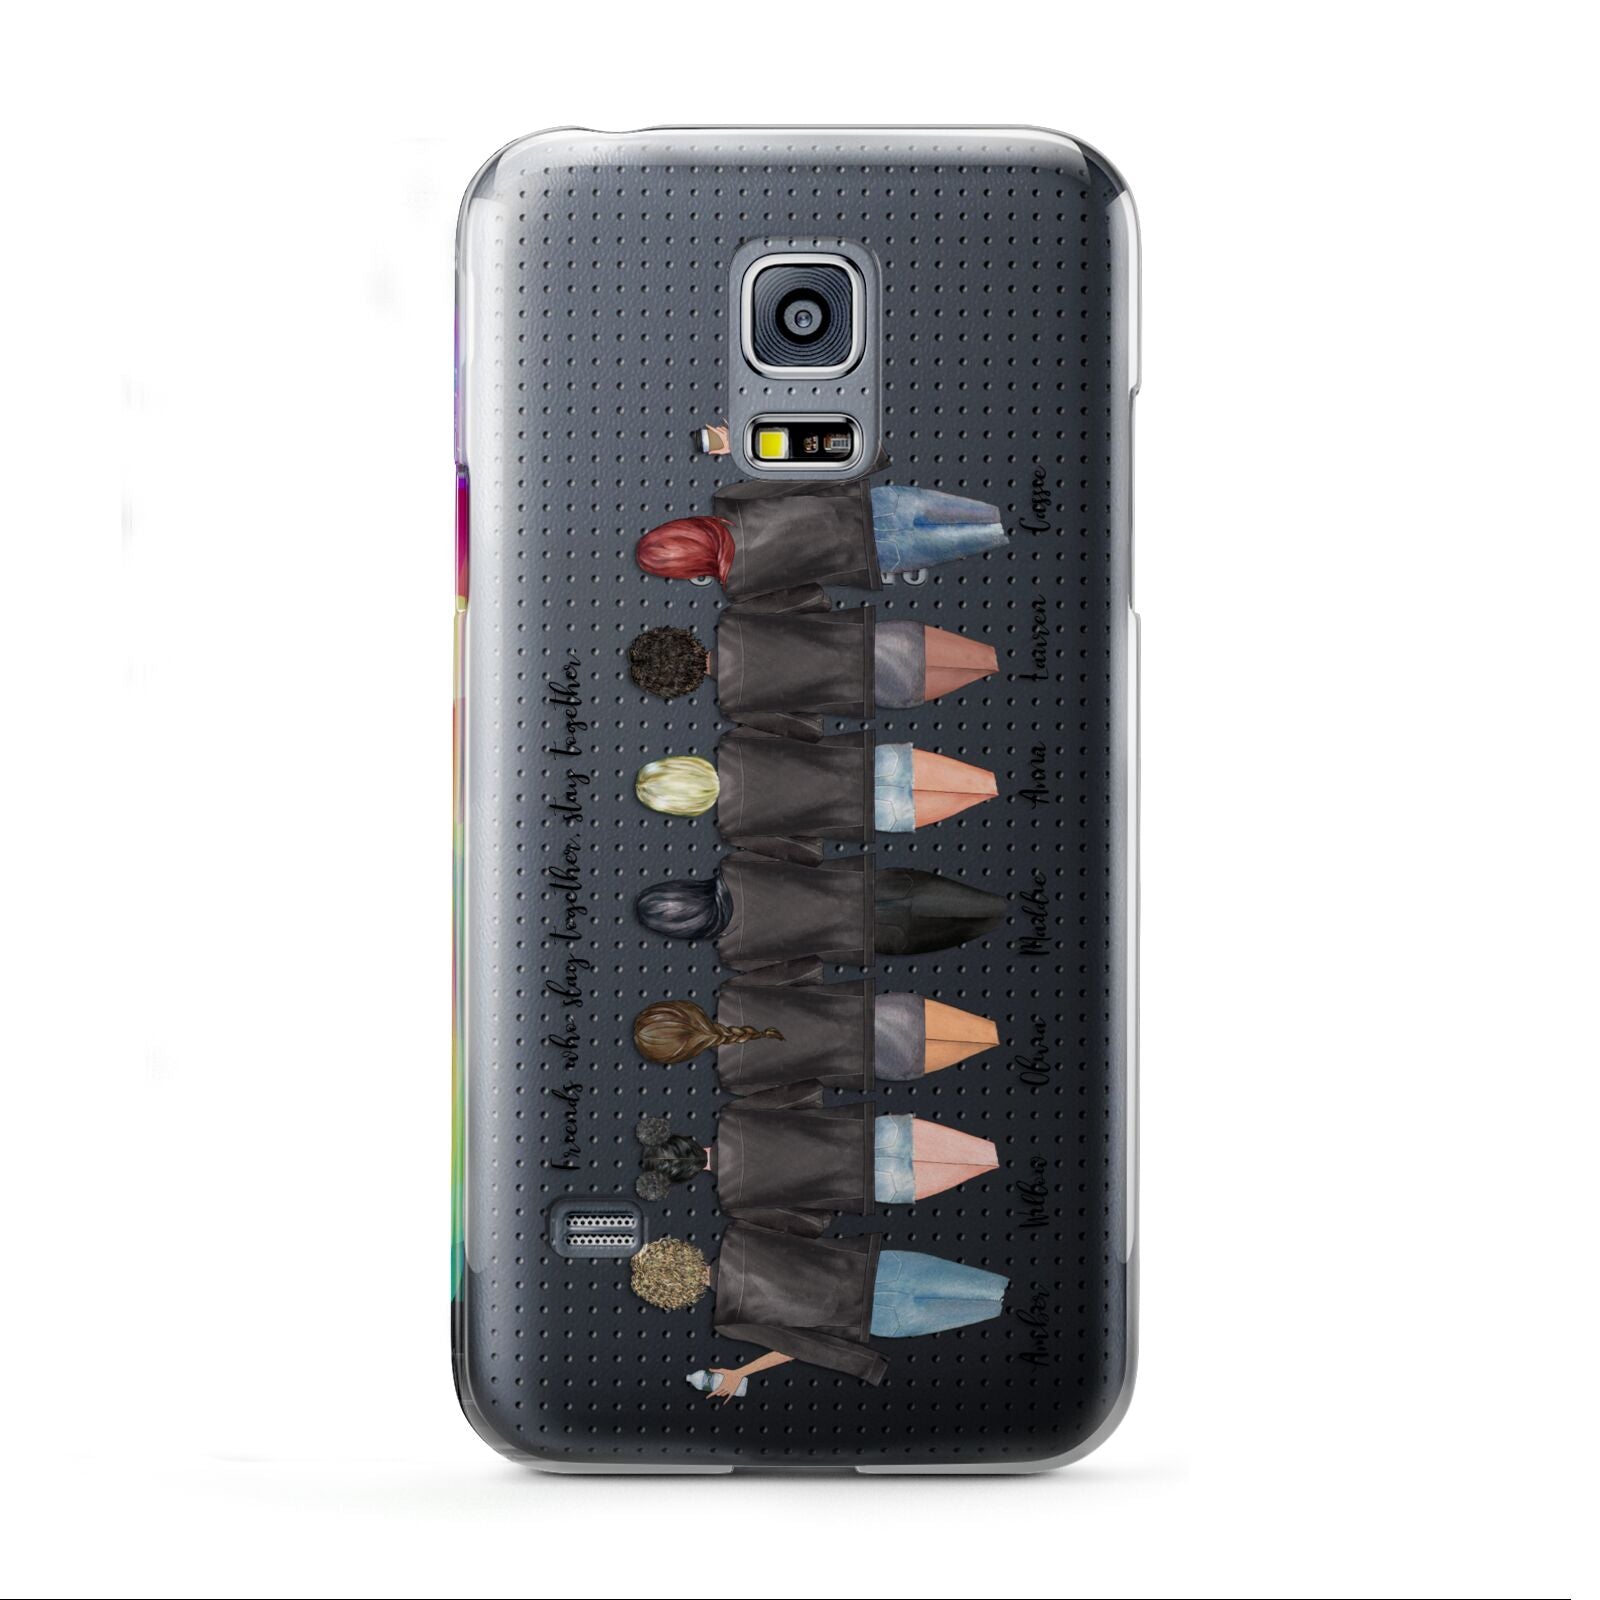 7 Best Friends with Names Samsung Galaxy S5 Mini Case